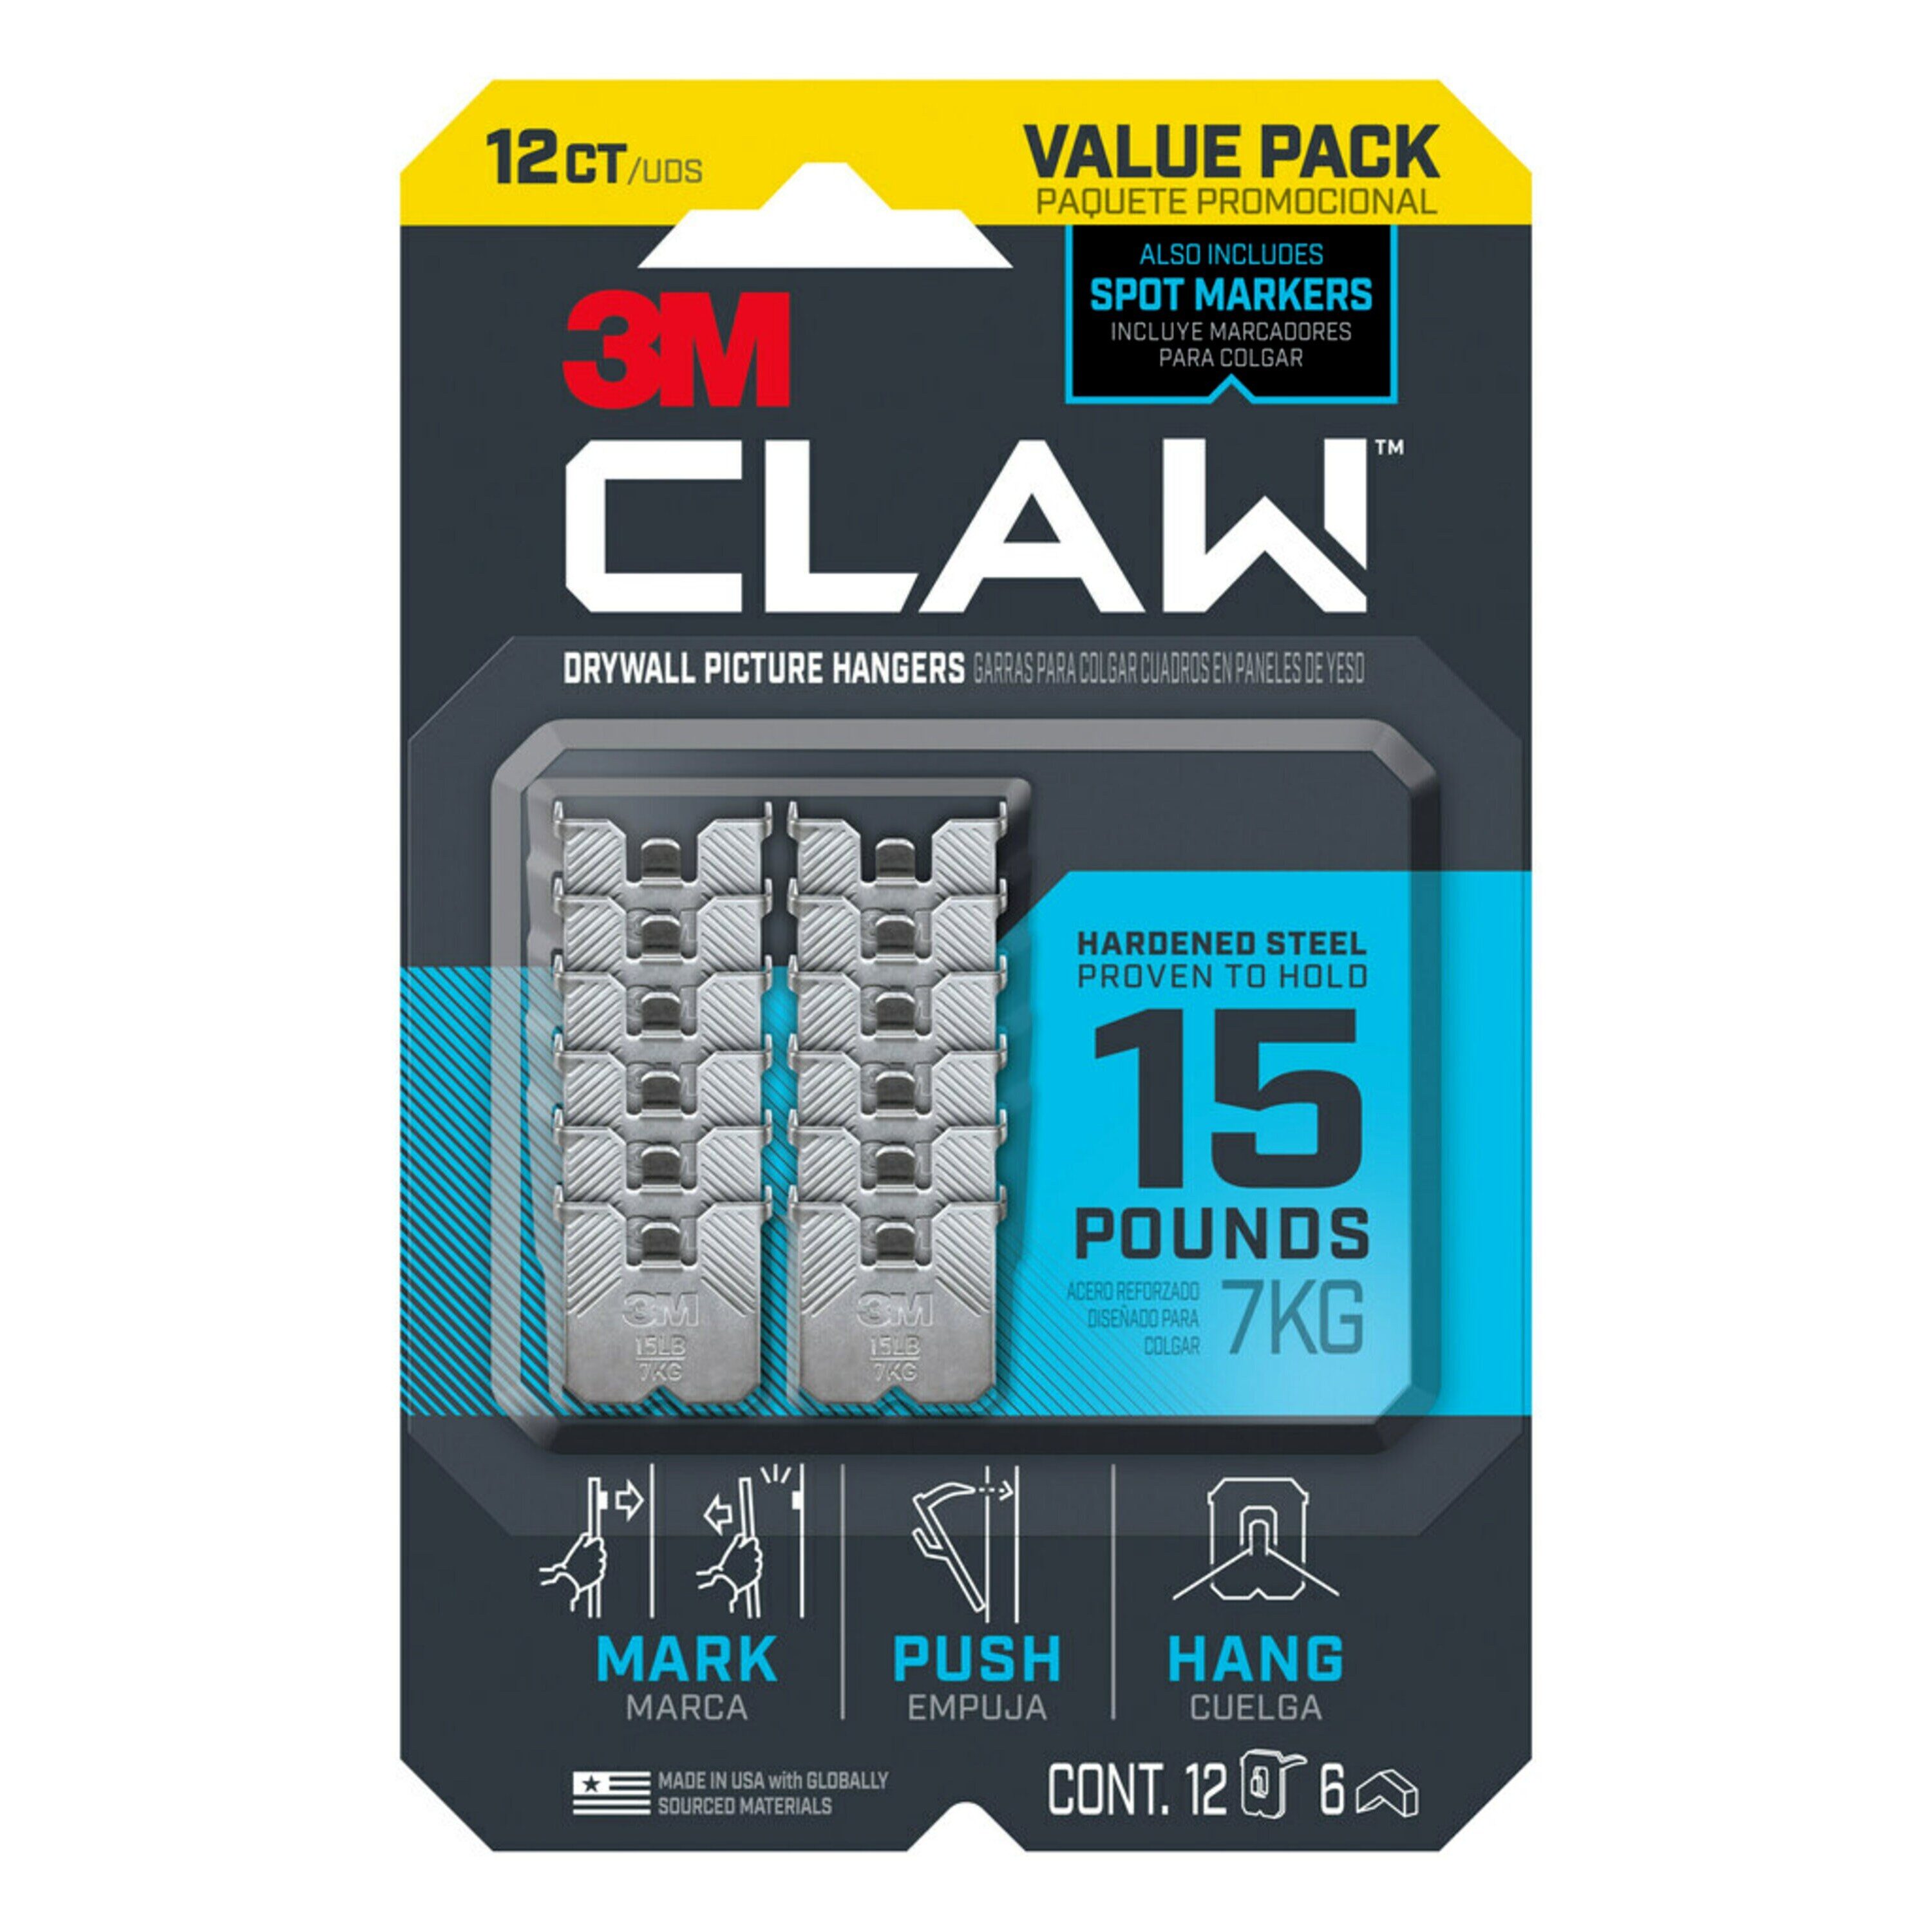 3M 3m Claw Drywall Picture Hangers 65lb with Temporary Spot Markers  3ph65m-5es, 5 Hangers, 3 Markers in the Picture Hangers department at